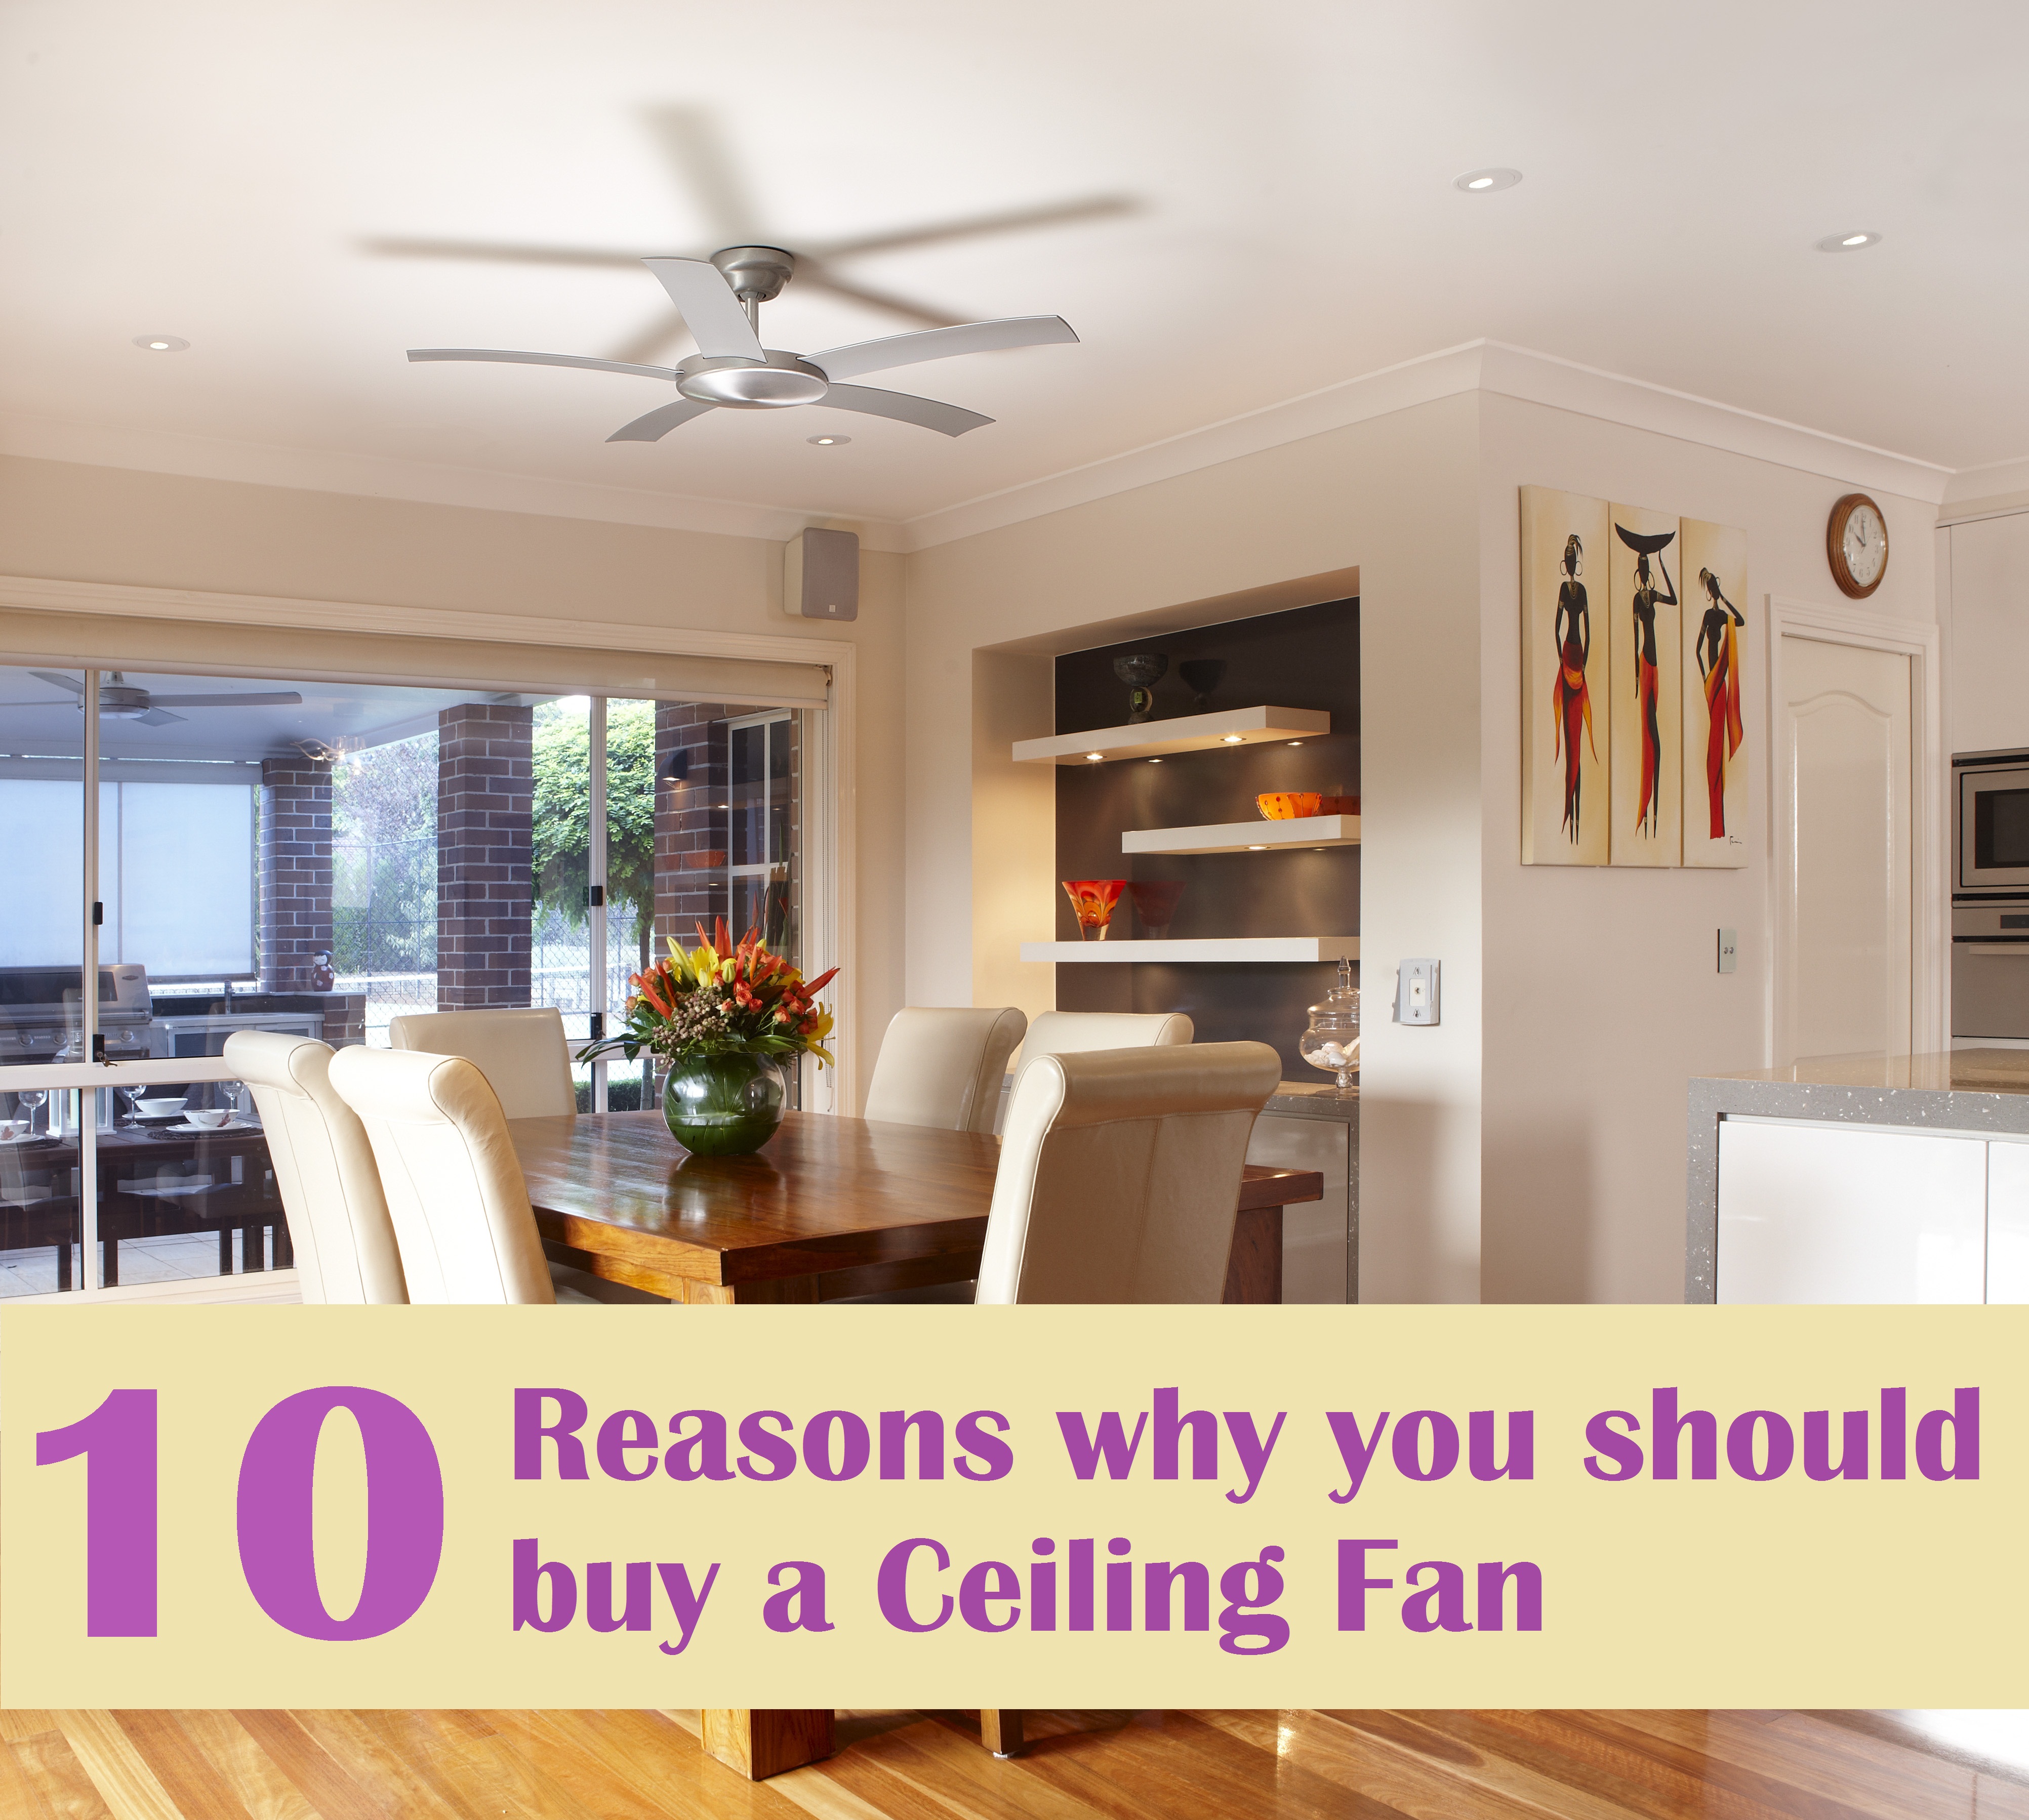 10 reasons why you should install a Ceiling Fan